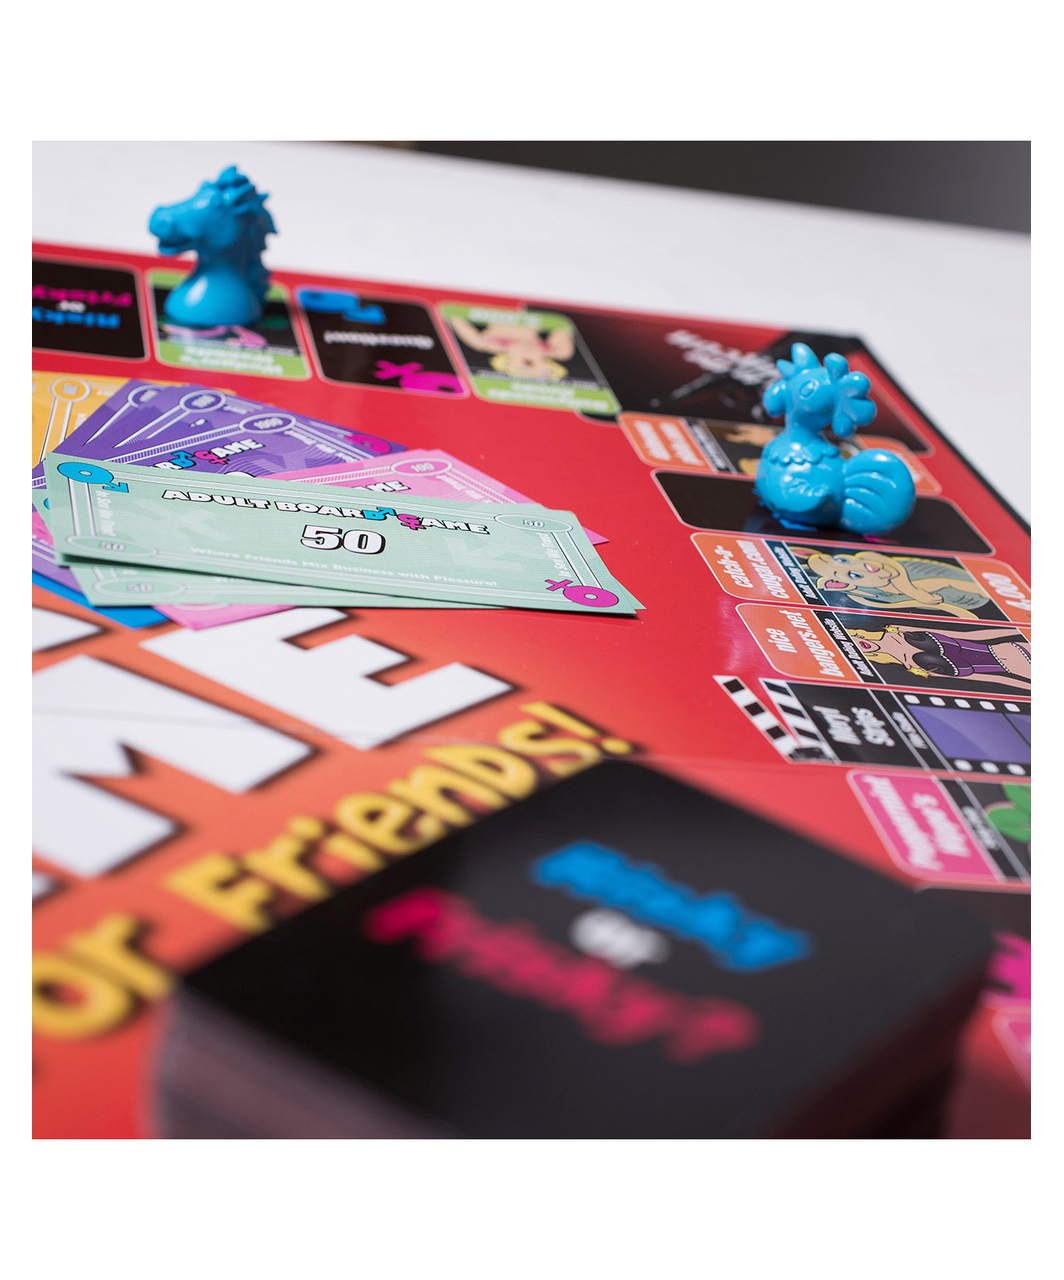 Creative Conceptions The Really Cheeky Adult Board Game